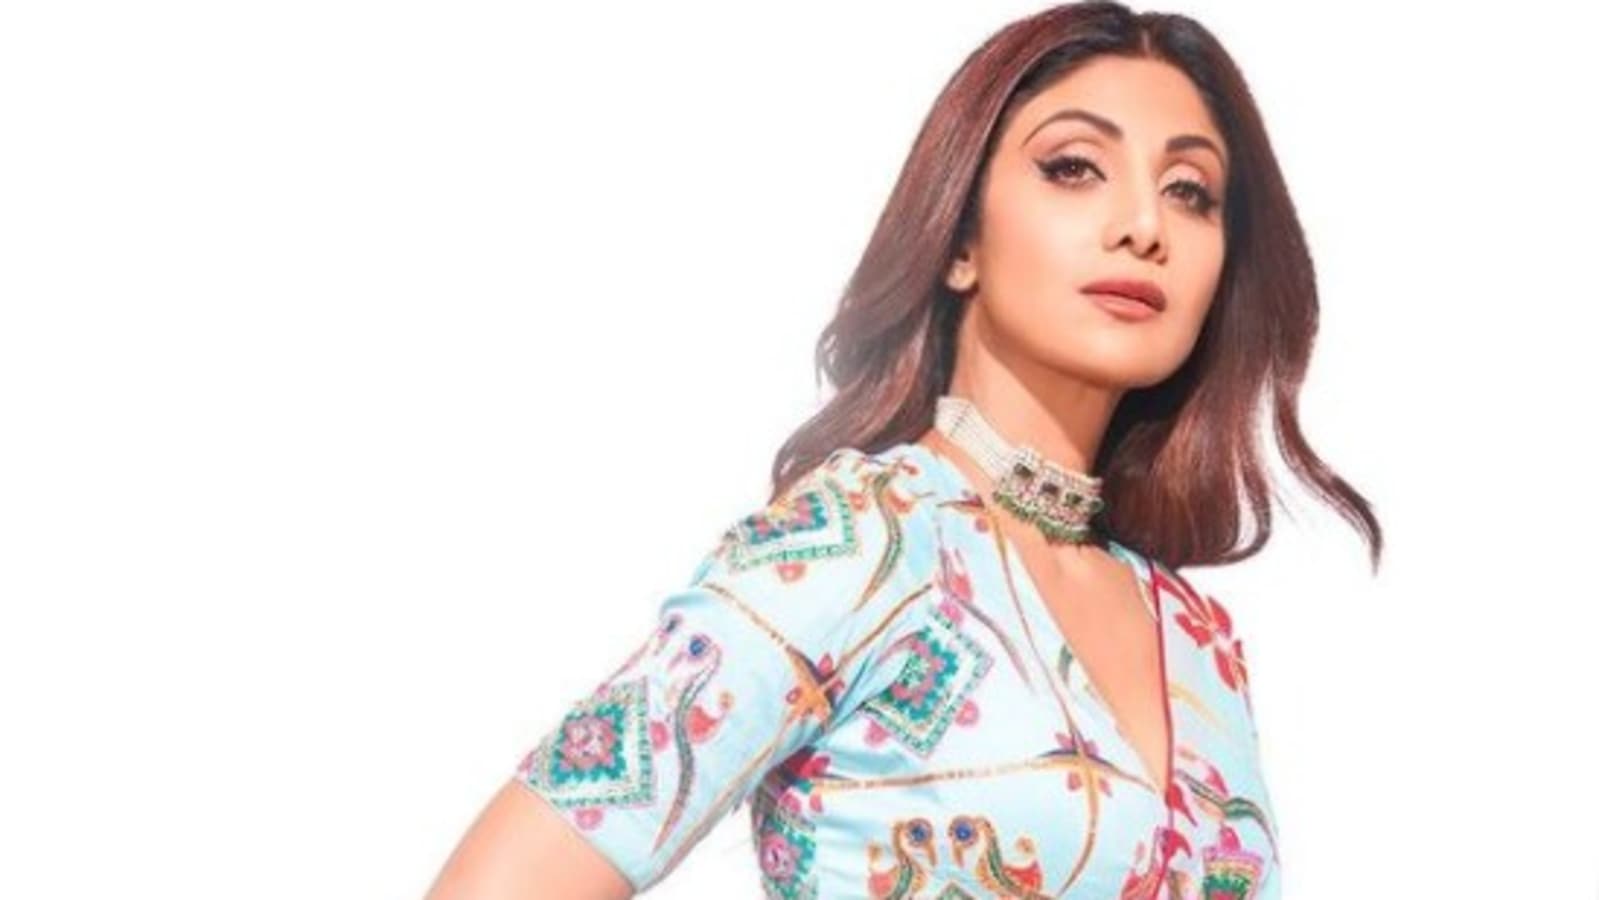 Madhuri Dixit Gaand Bur Chudai - Shilpa Shetty shares pics from first photoshoot after Raj Kundra's arrest,  is 'determined to rise'. See here | Bollywood - Hindustan Times